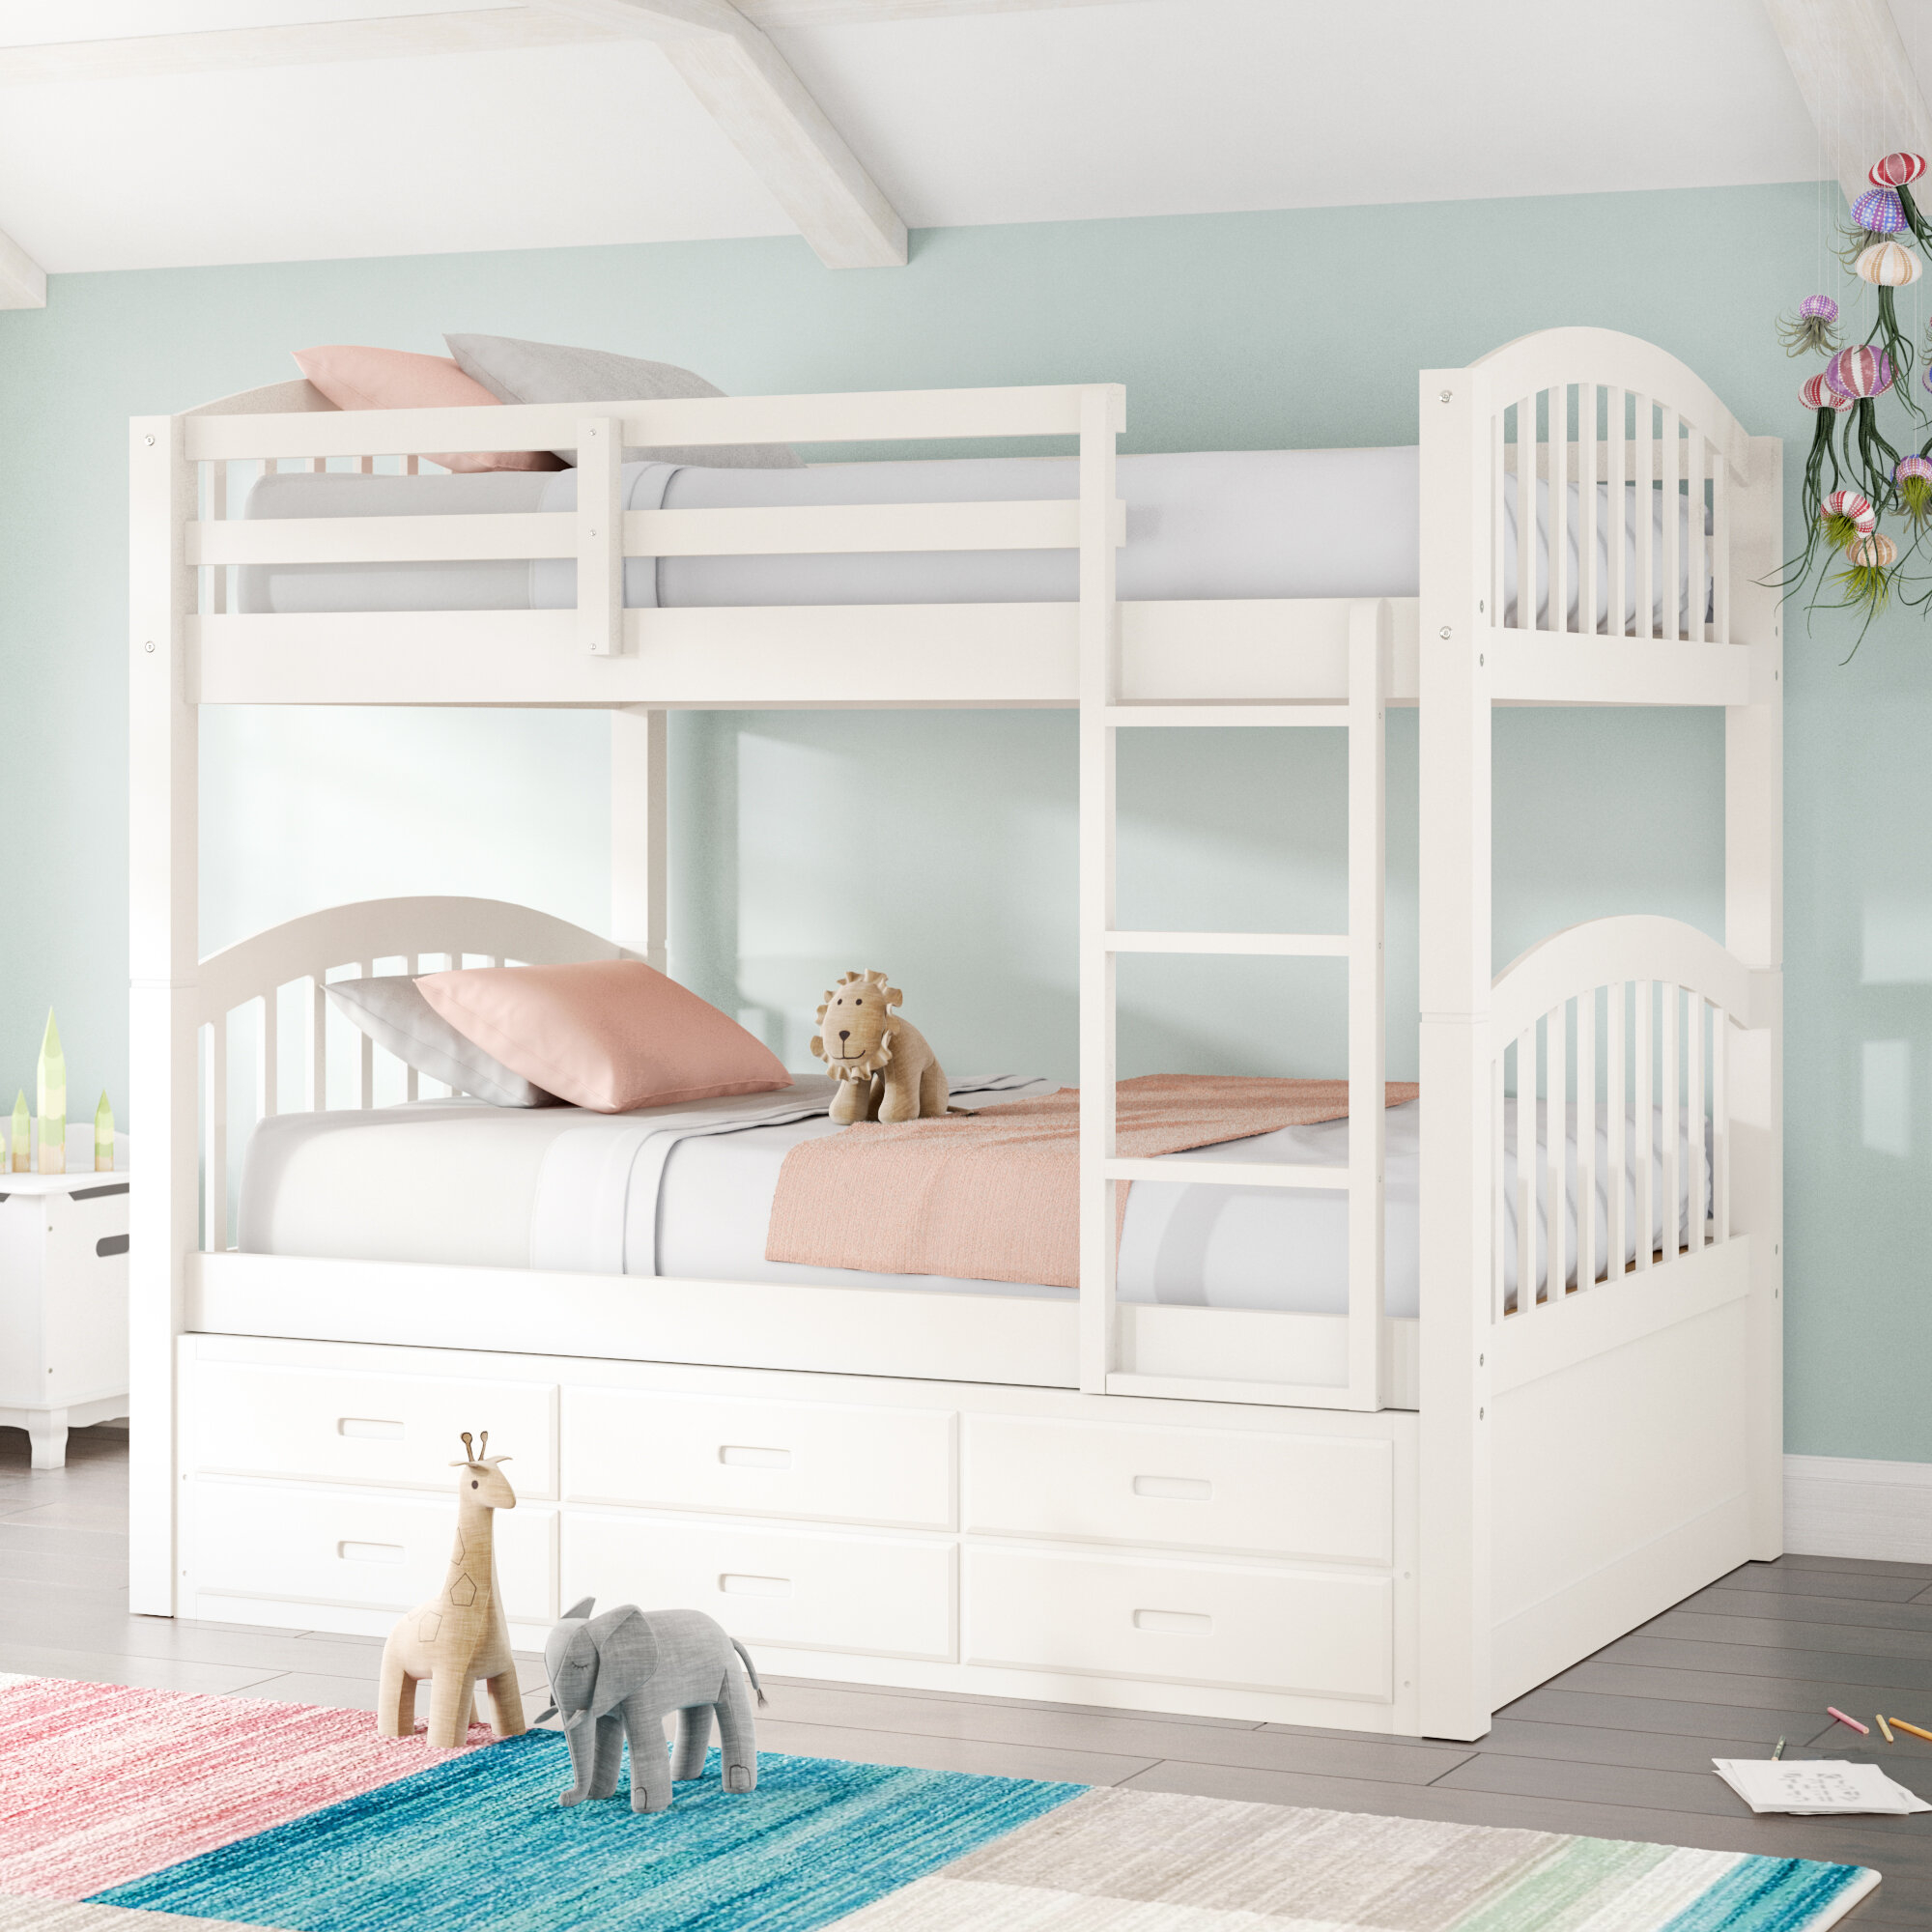 Bunk Beds With Dressers Visualhunt, Twin Over Bunk Bed With Trundle And Drawers